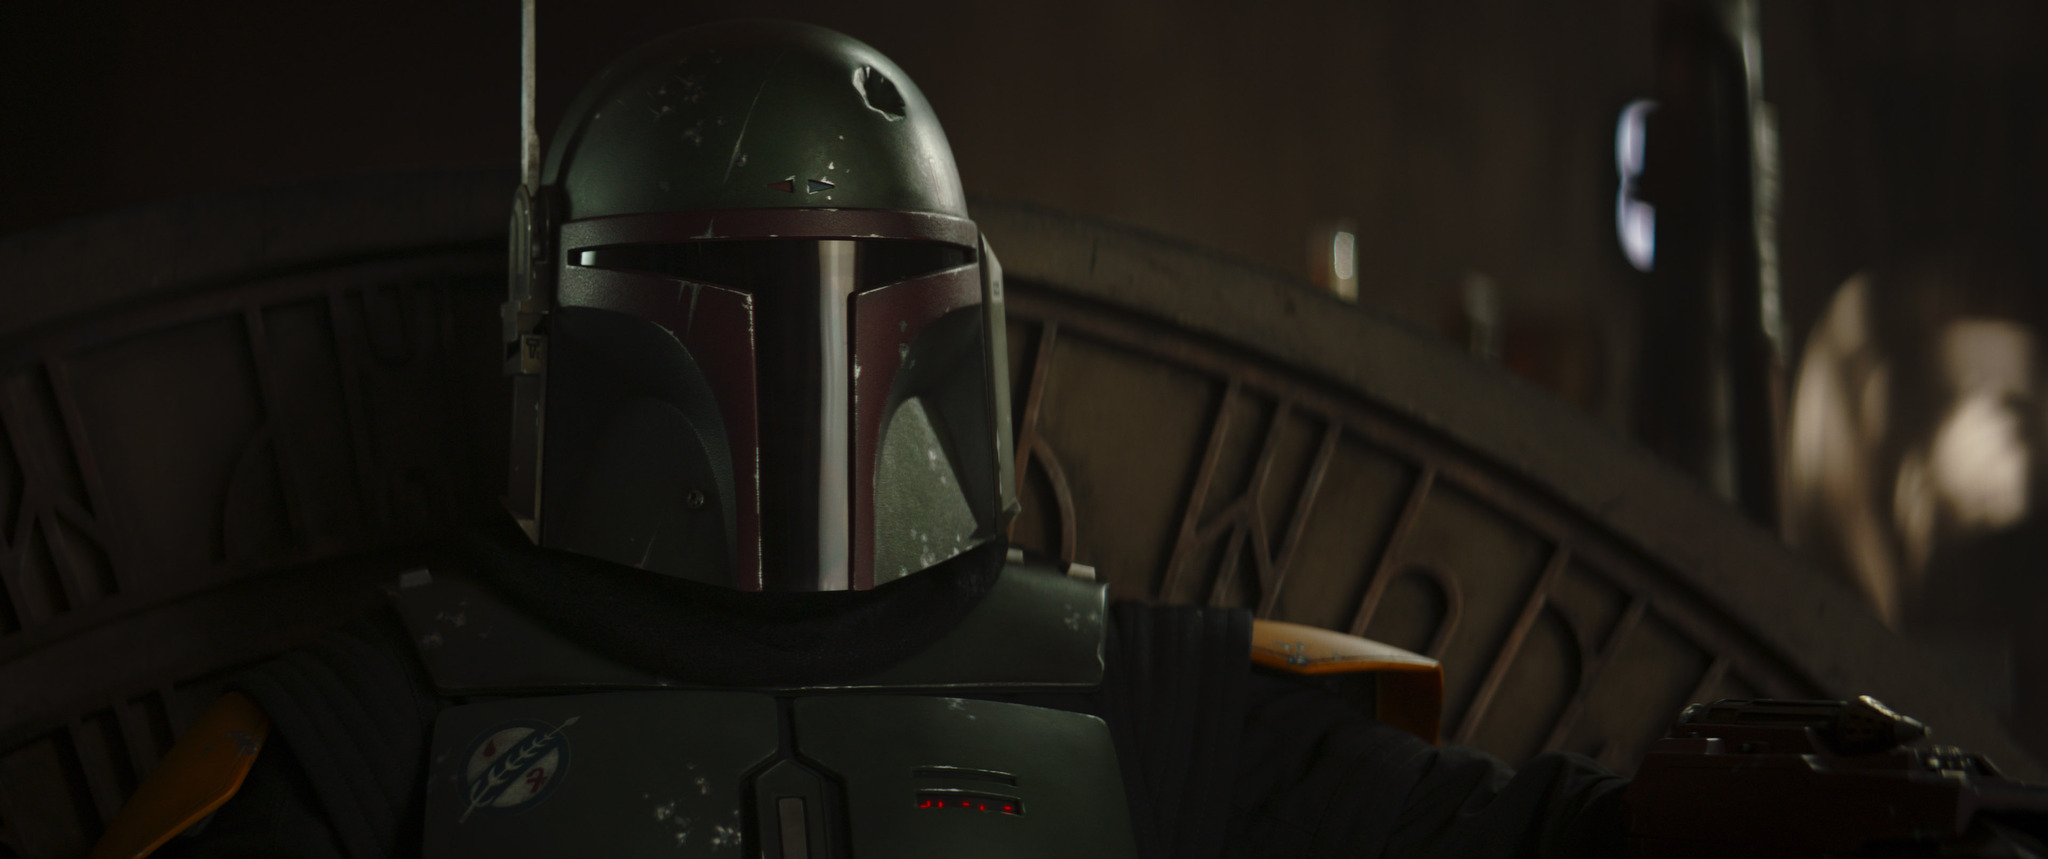 In a recent interview Temeura Morrison says he still hasn't heard anything about The Book of Boba Fett Season 2.